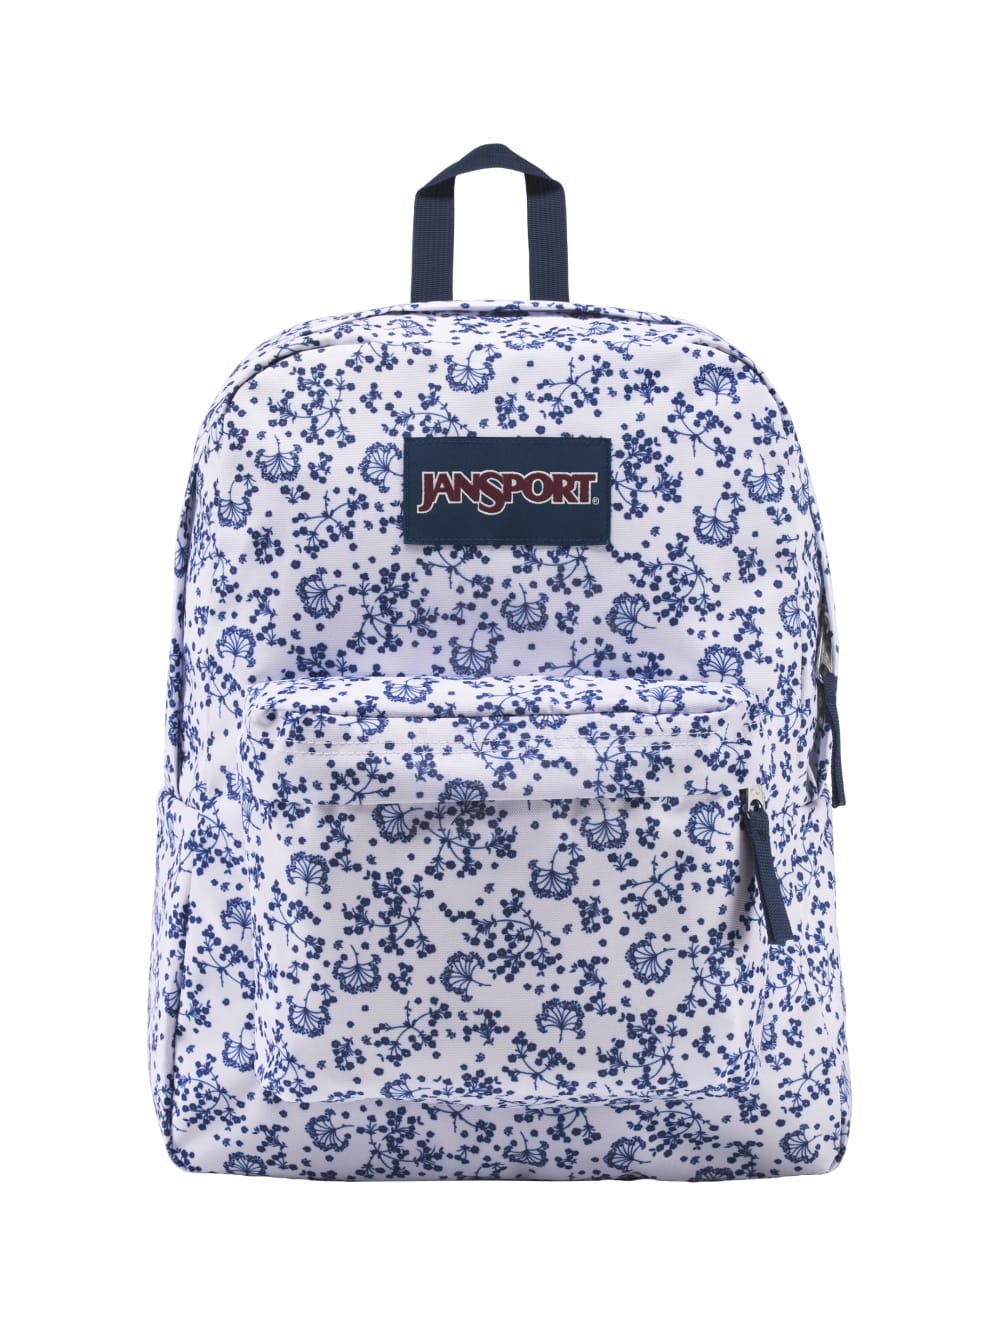 jansport backpack white and blue